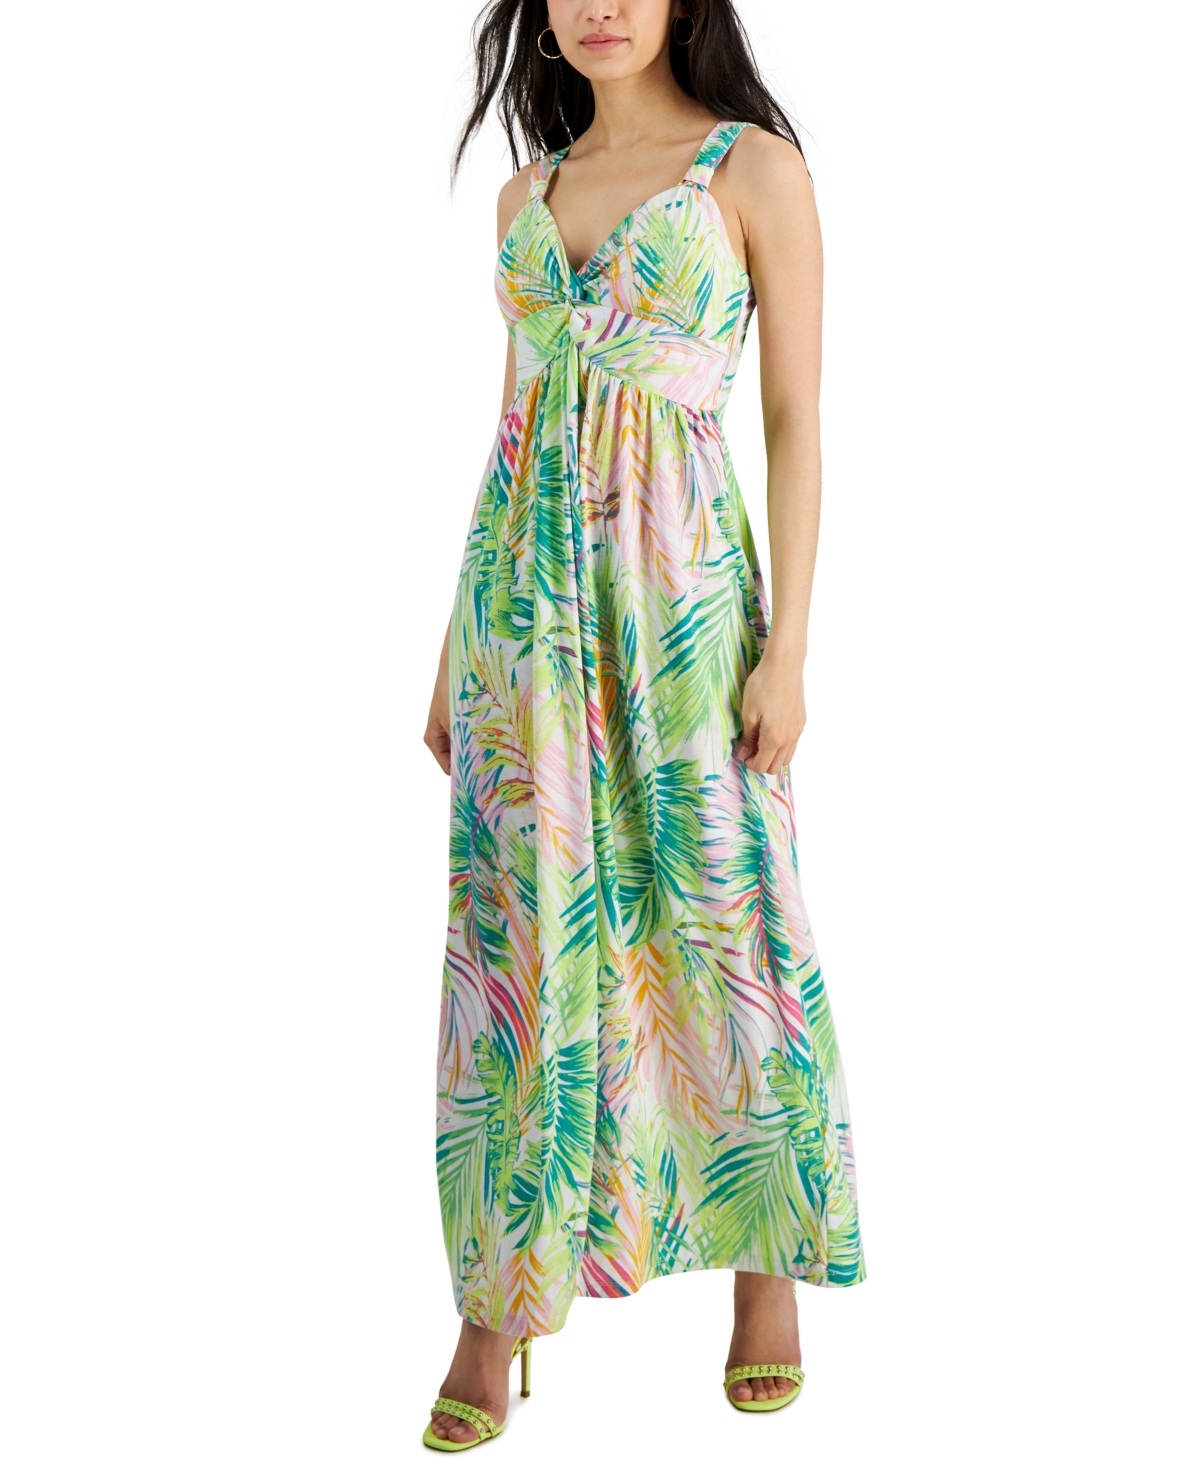 Jamie & Layla Petite Printed Twist-front Maxi Dress In Bright White Palm